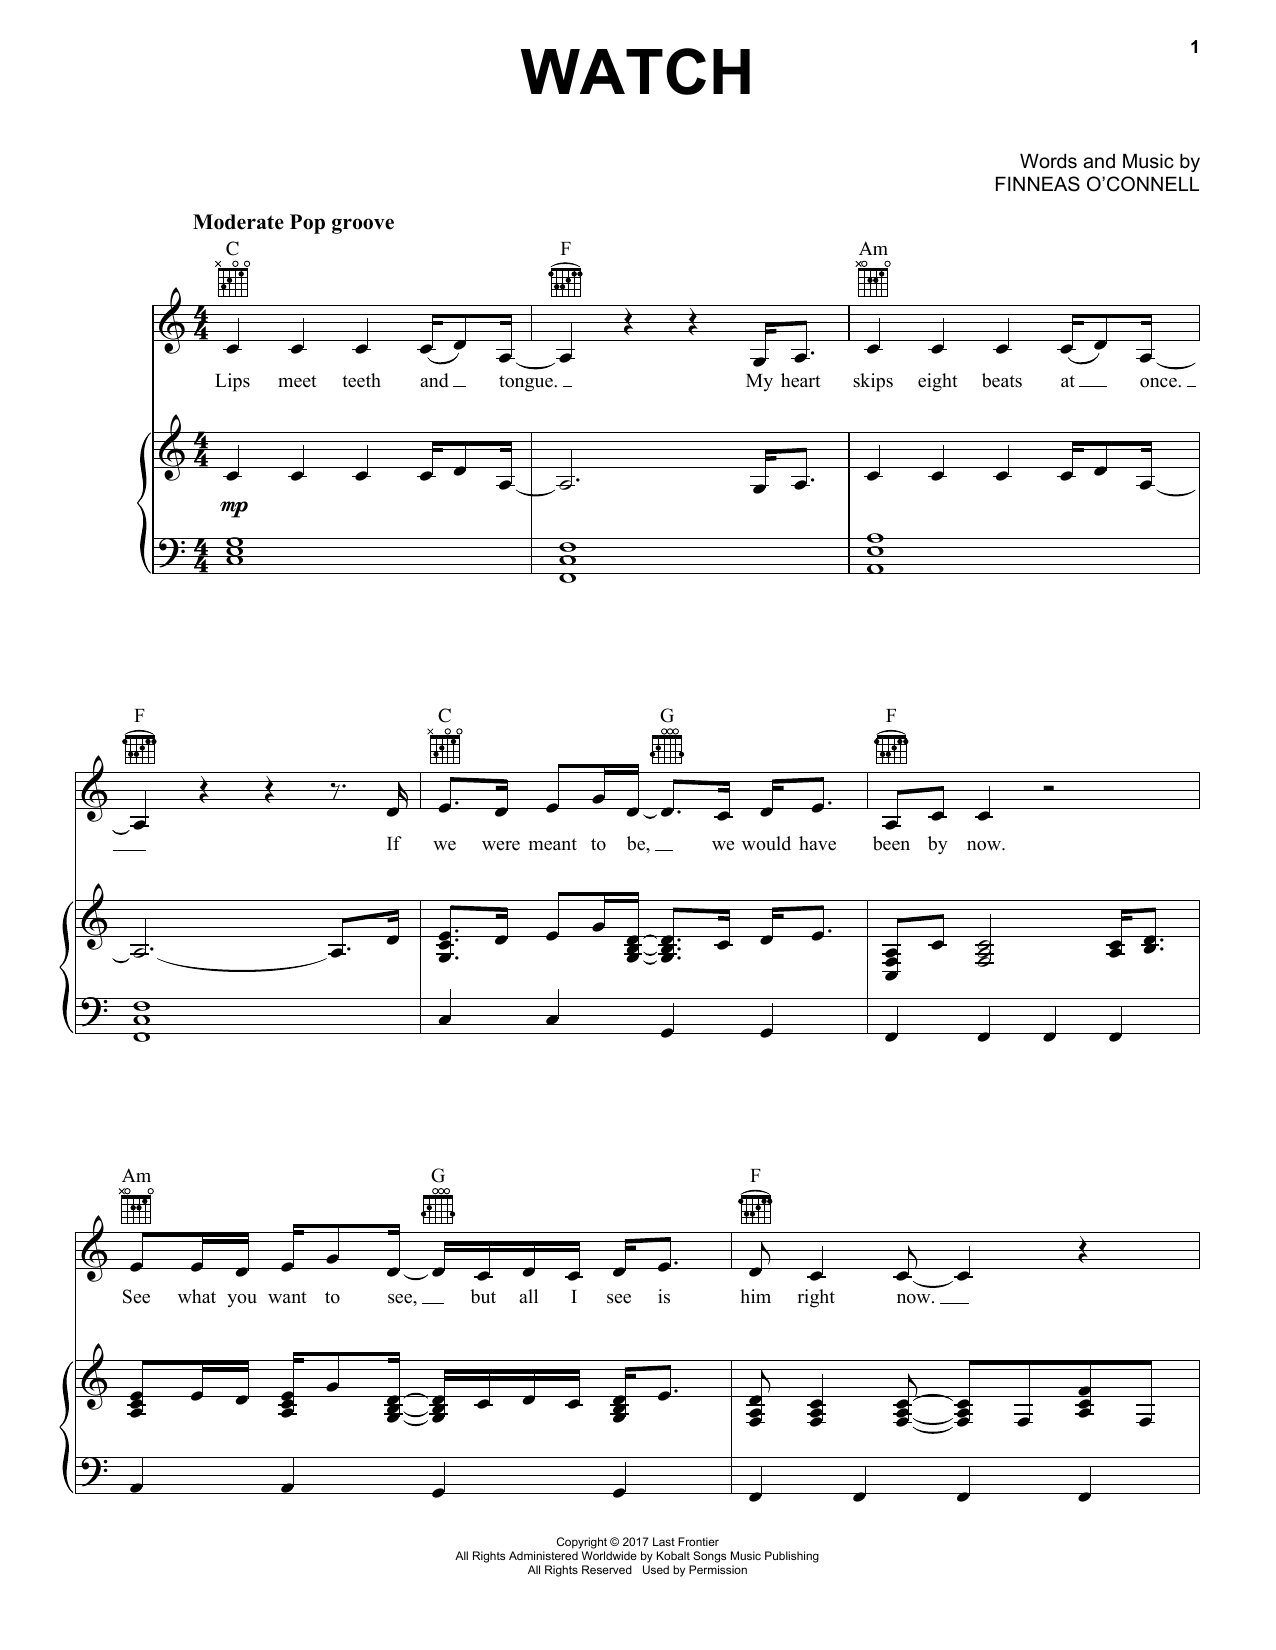 Microprocessor stapel blik Billie Eilish "watch" Sheet Music PDF Notes, Chords | Pop Score Piano,  Vocal & Guitar (Right-Hand Melody) Download Printable. SKU: 411537